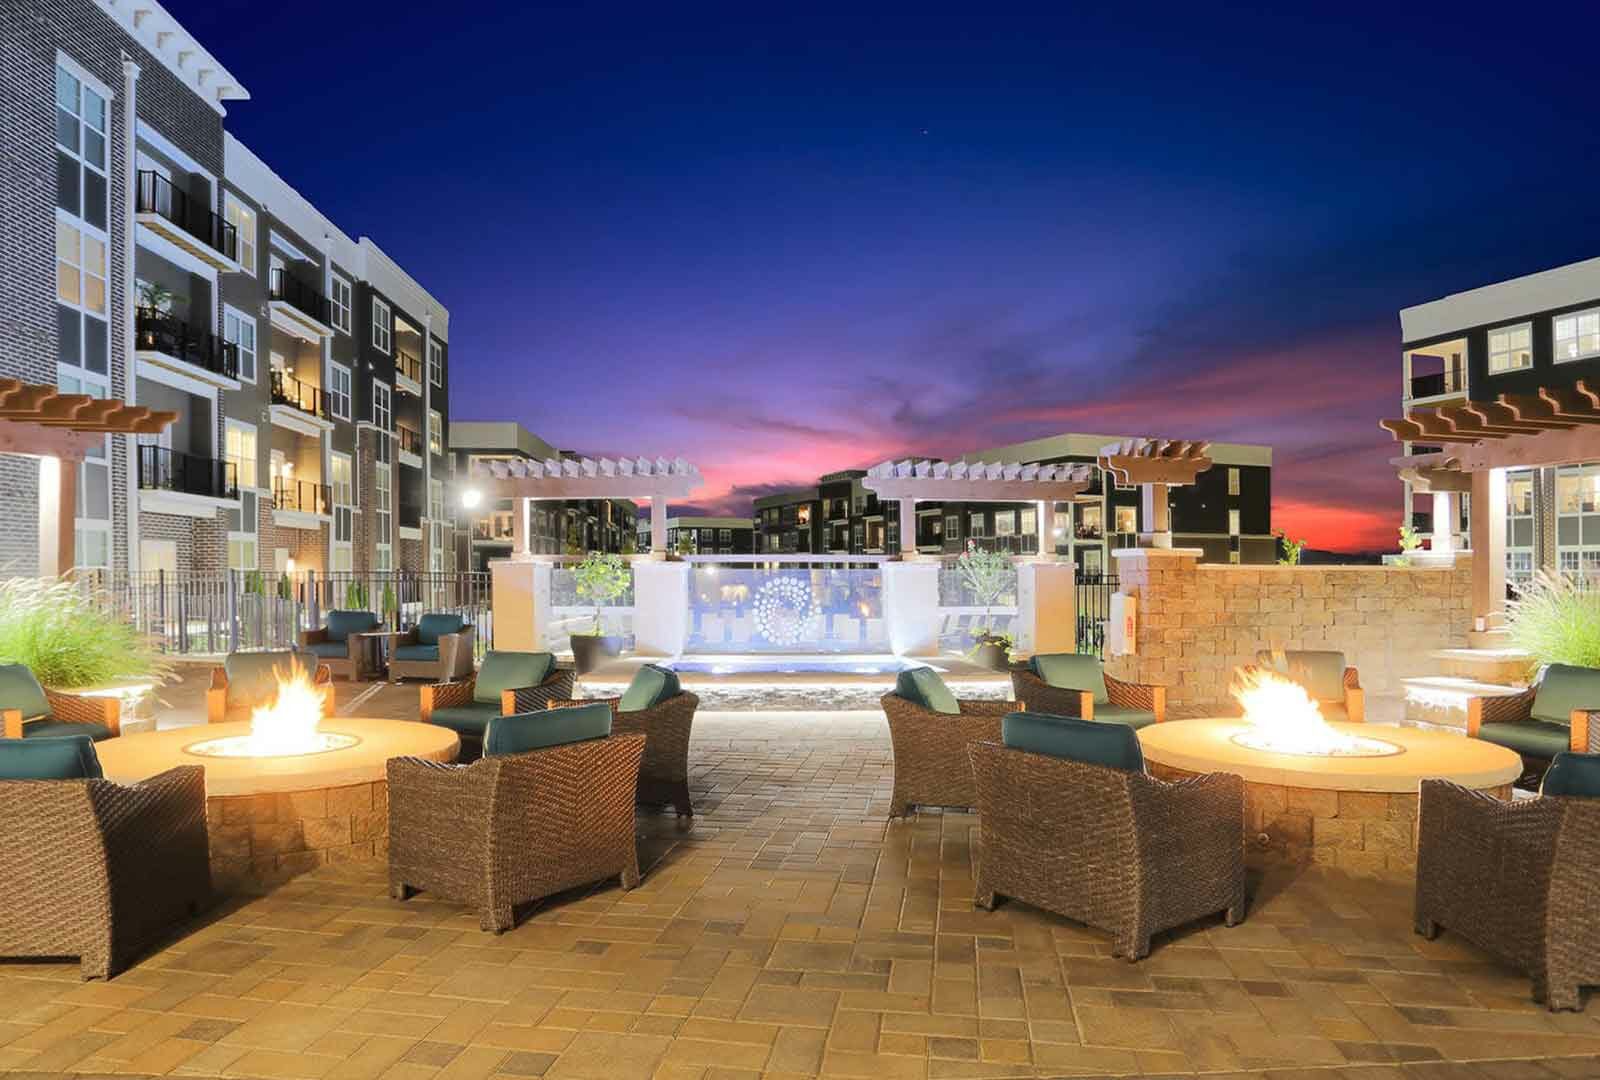 Allure social deck with fire pits and grilling stations